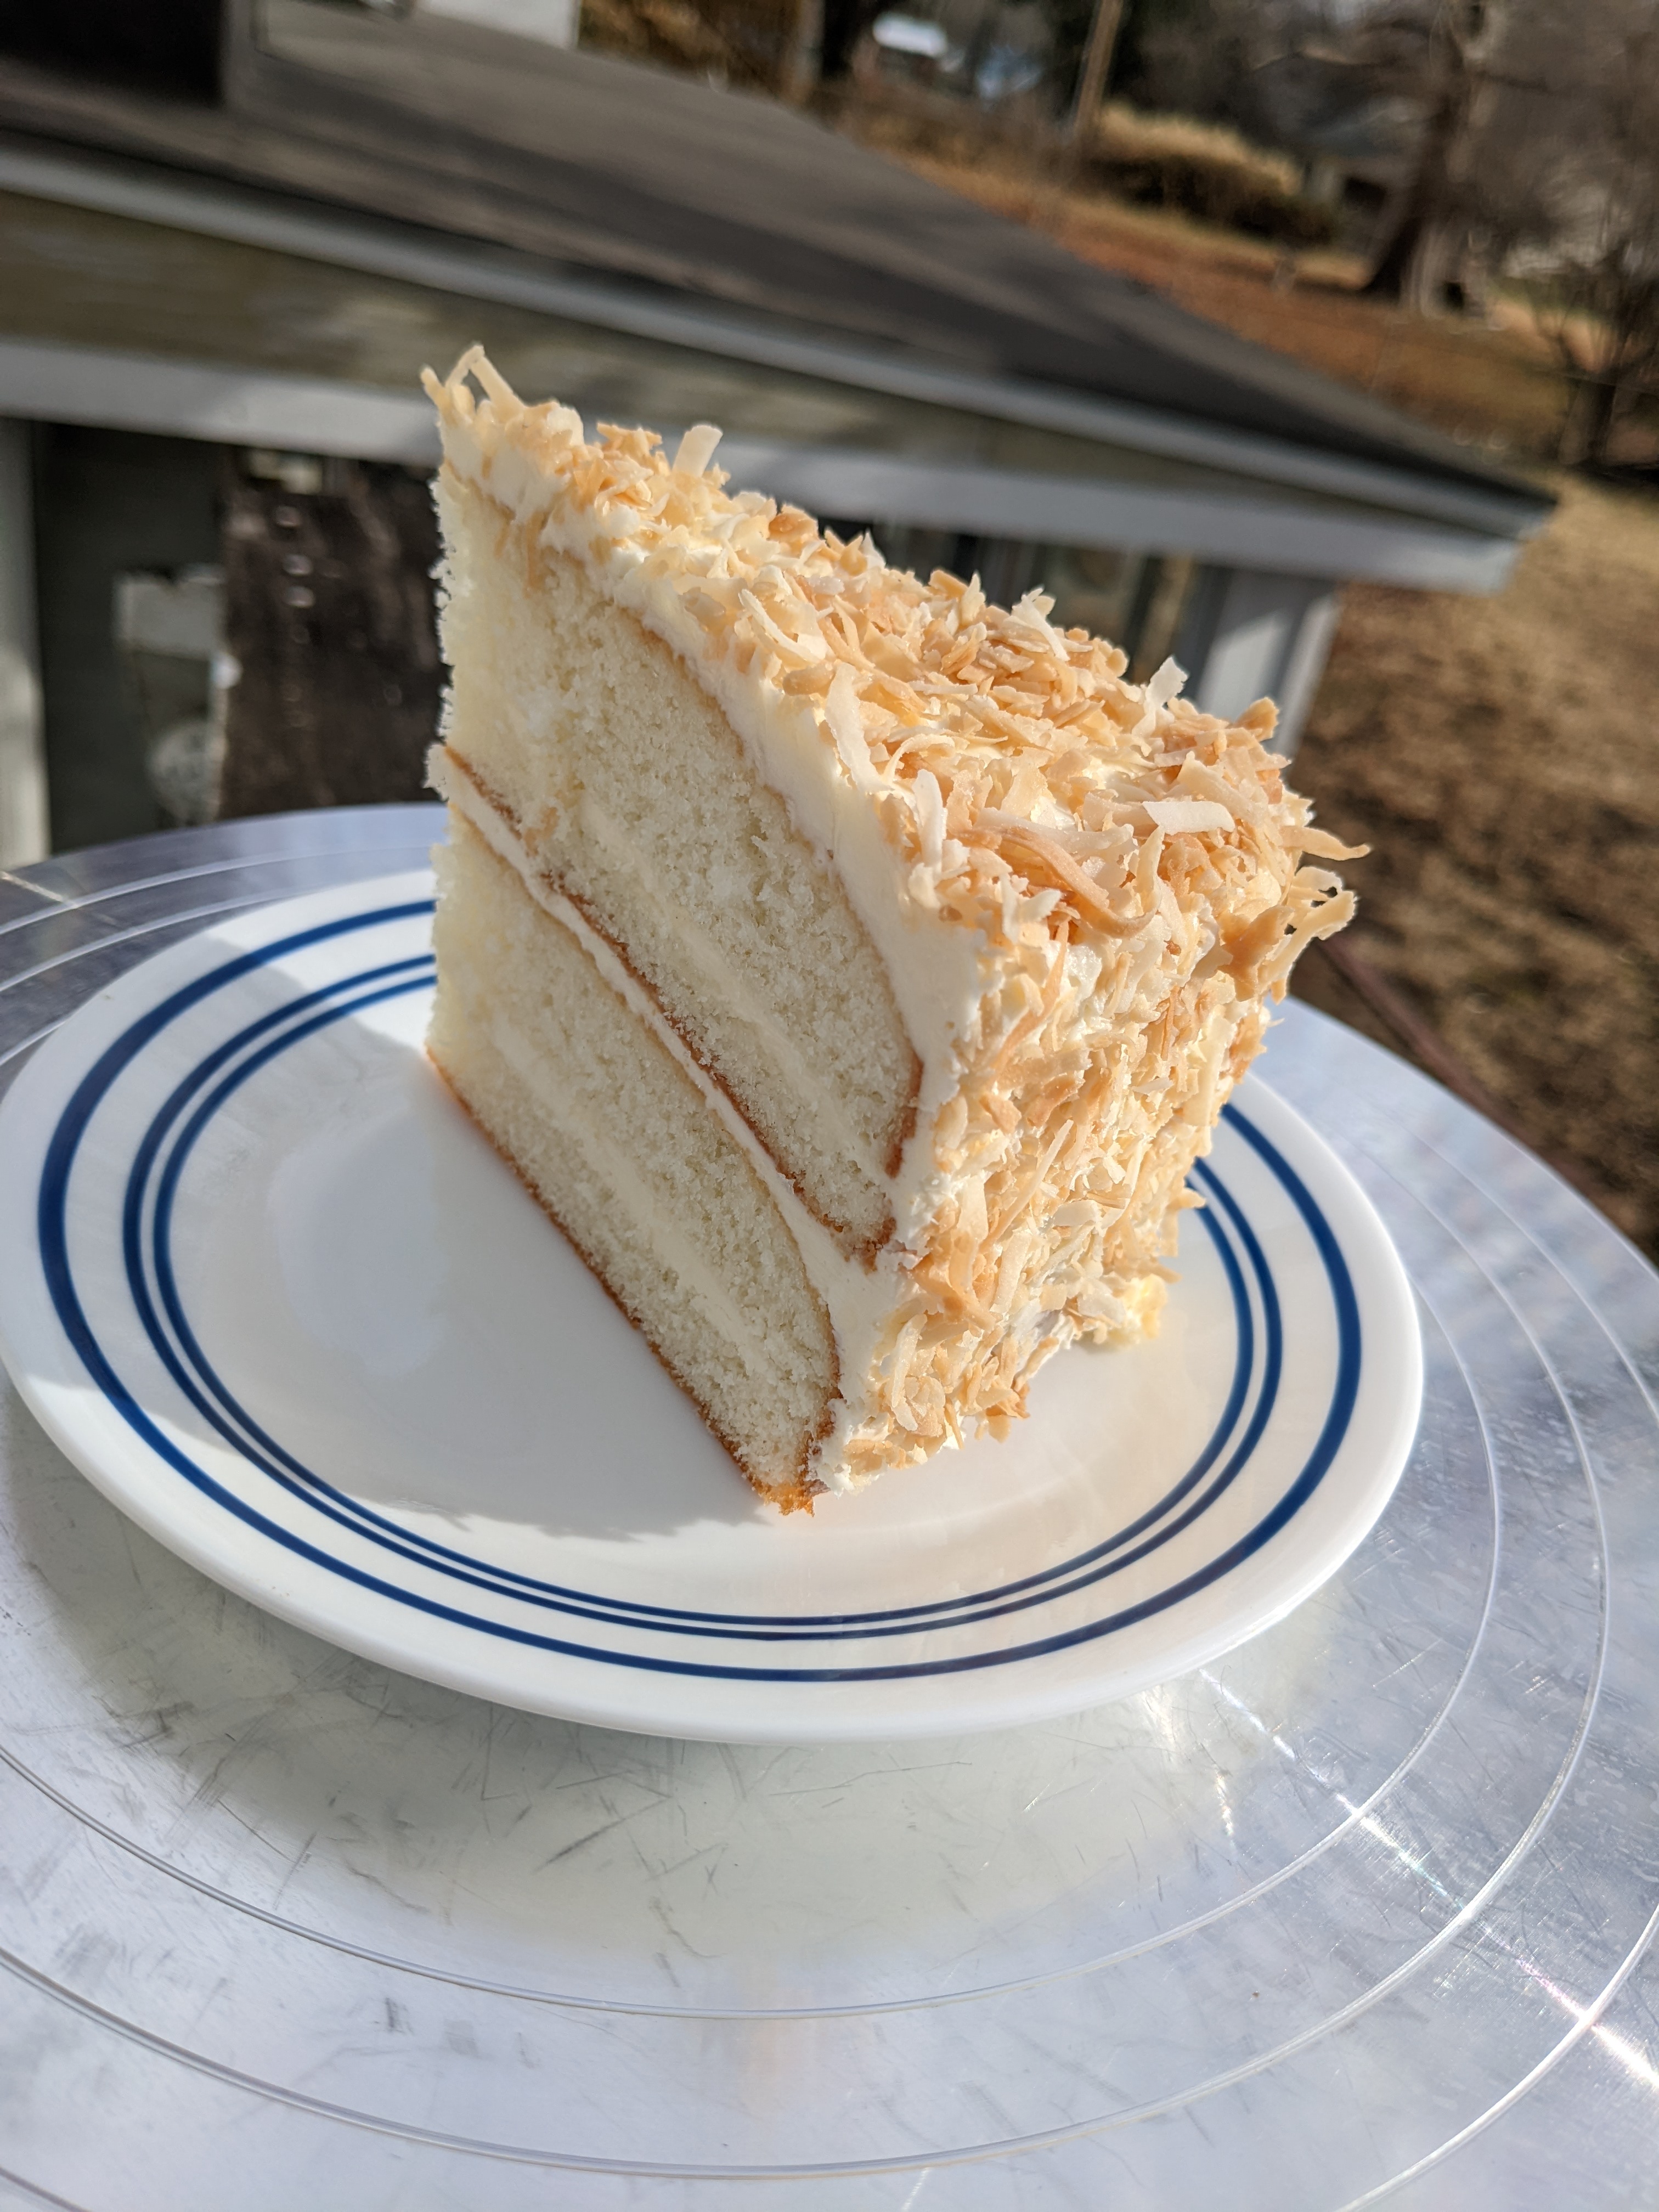 A slice of white cake with four layers, covered in tan and white coconut flakes.